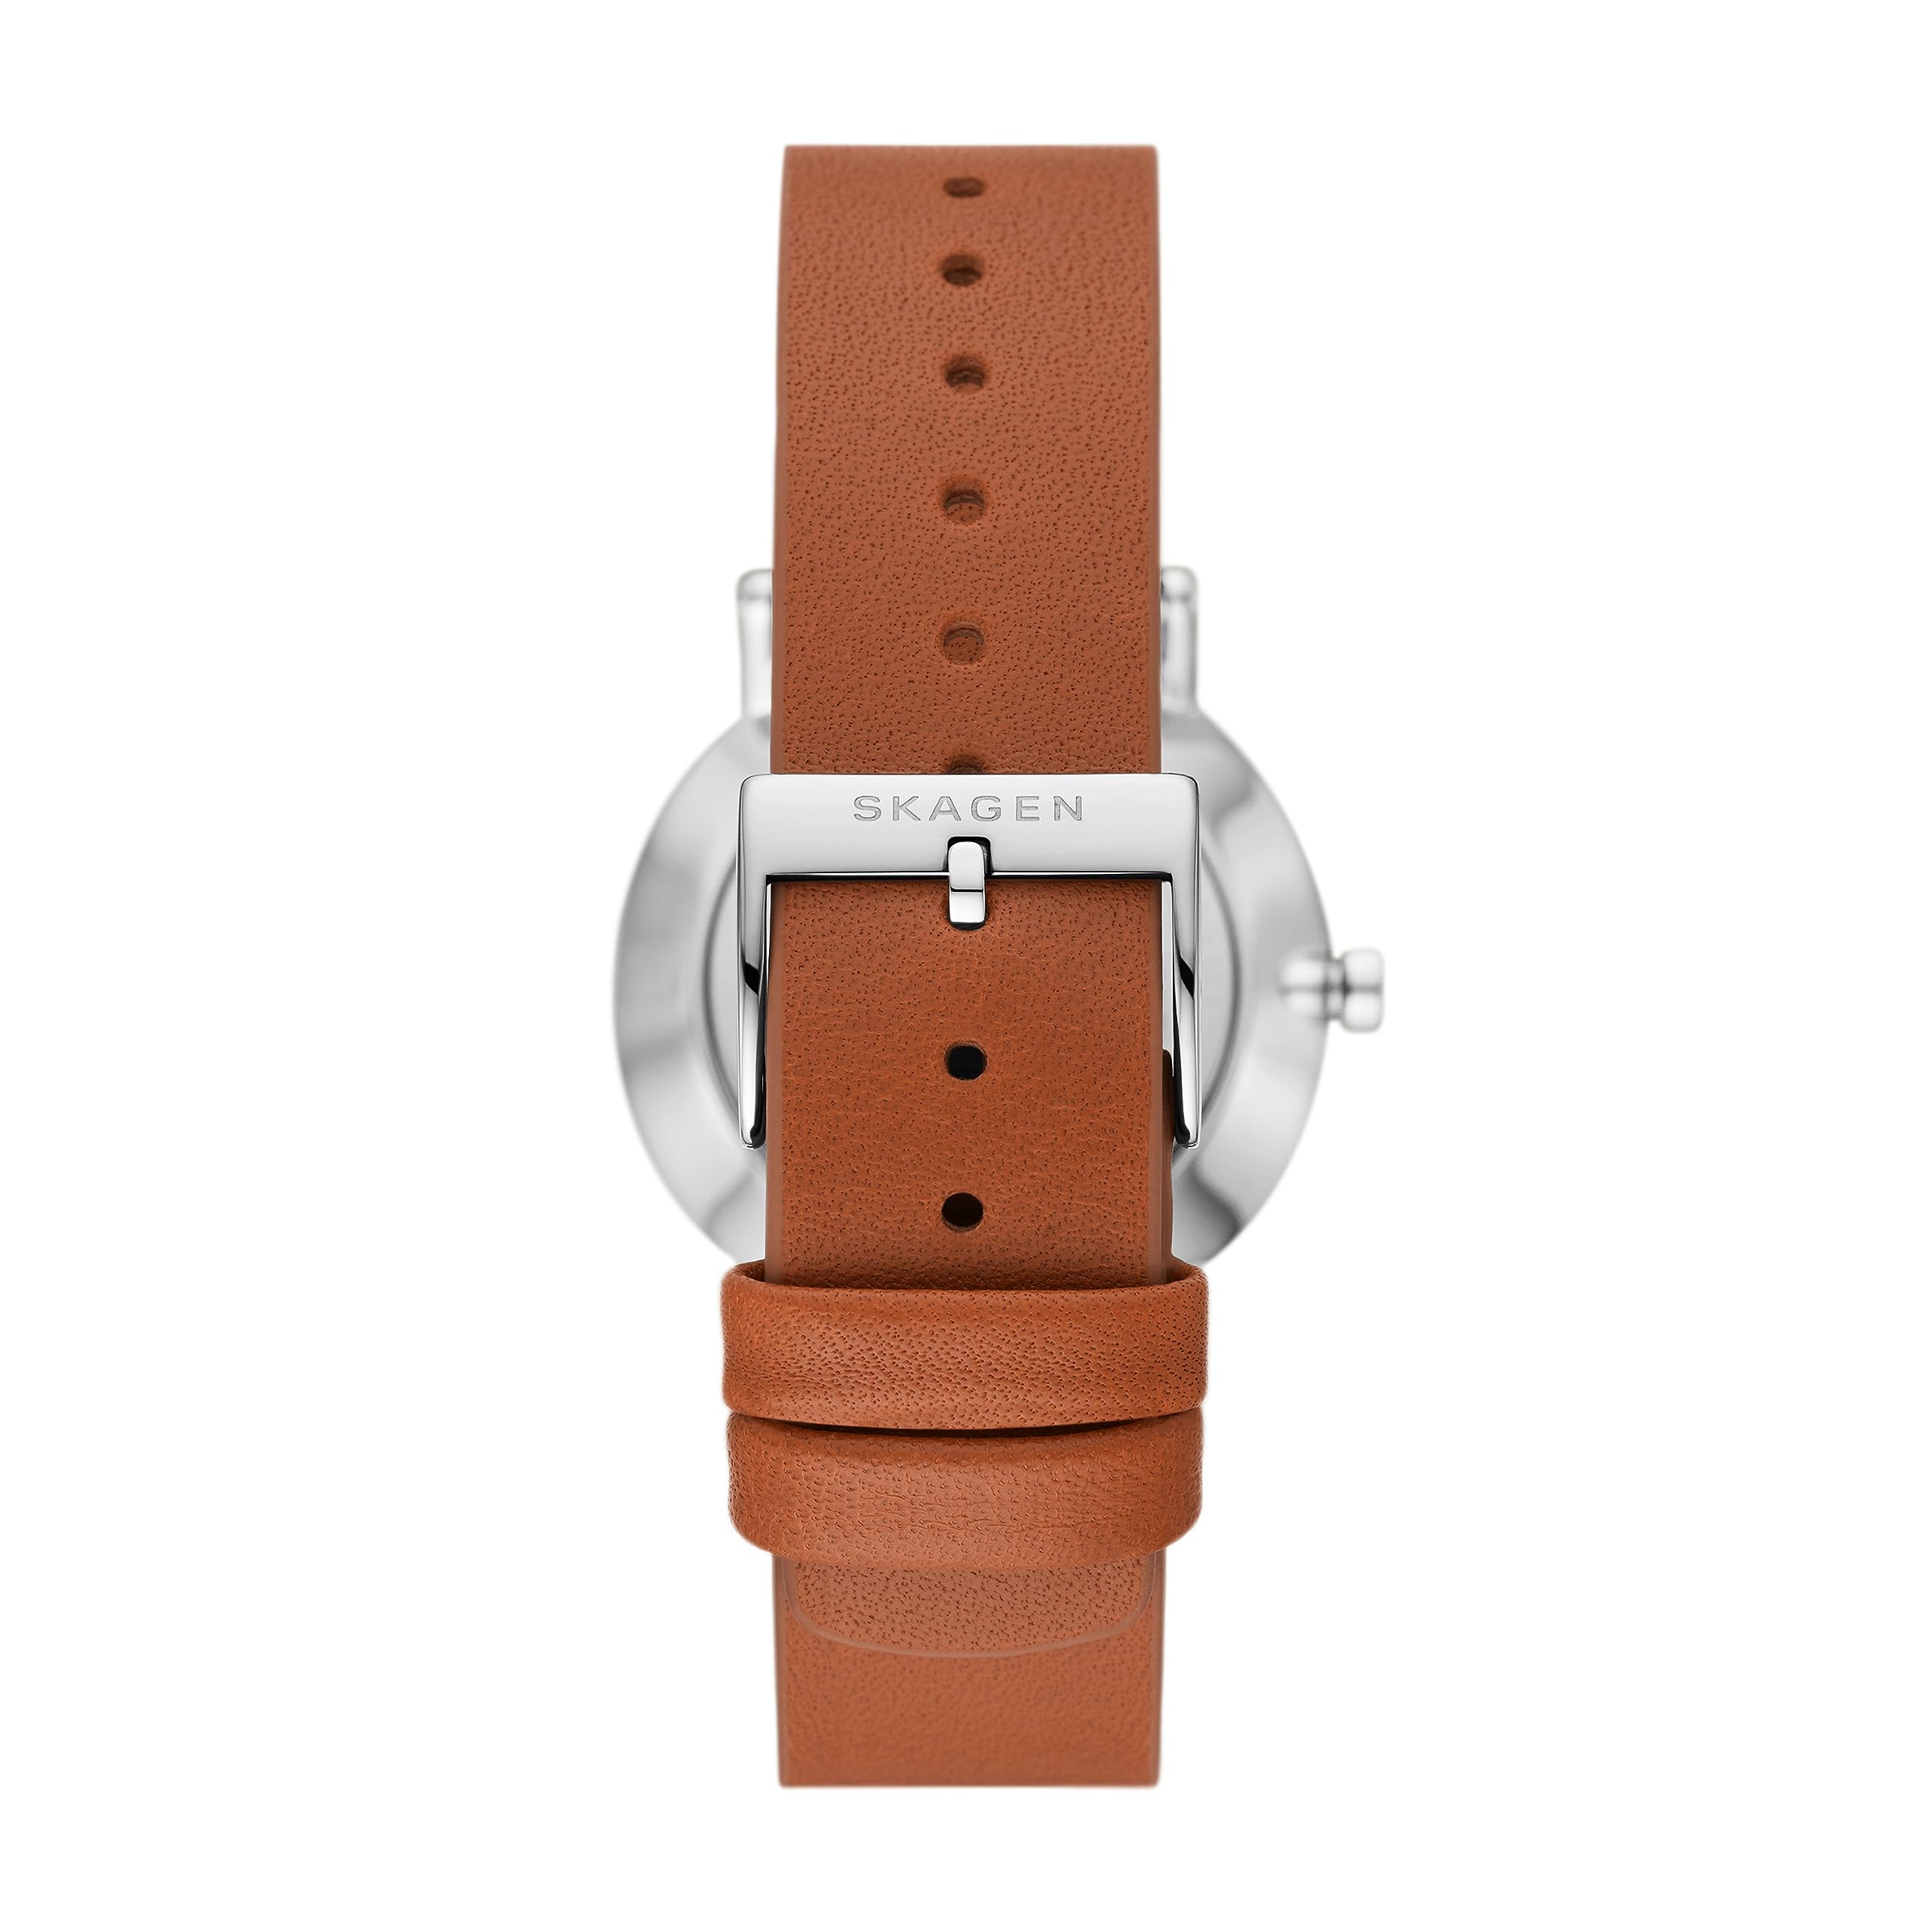 Skagen Women's Kuppel Lille Two-Hand Sub-Second Watch with Steel Mesh or Leather Band